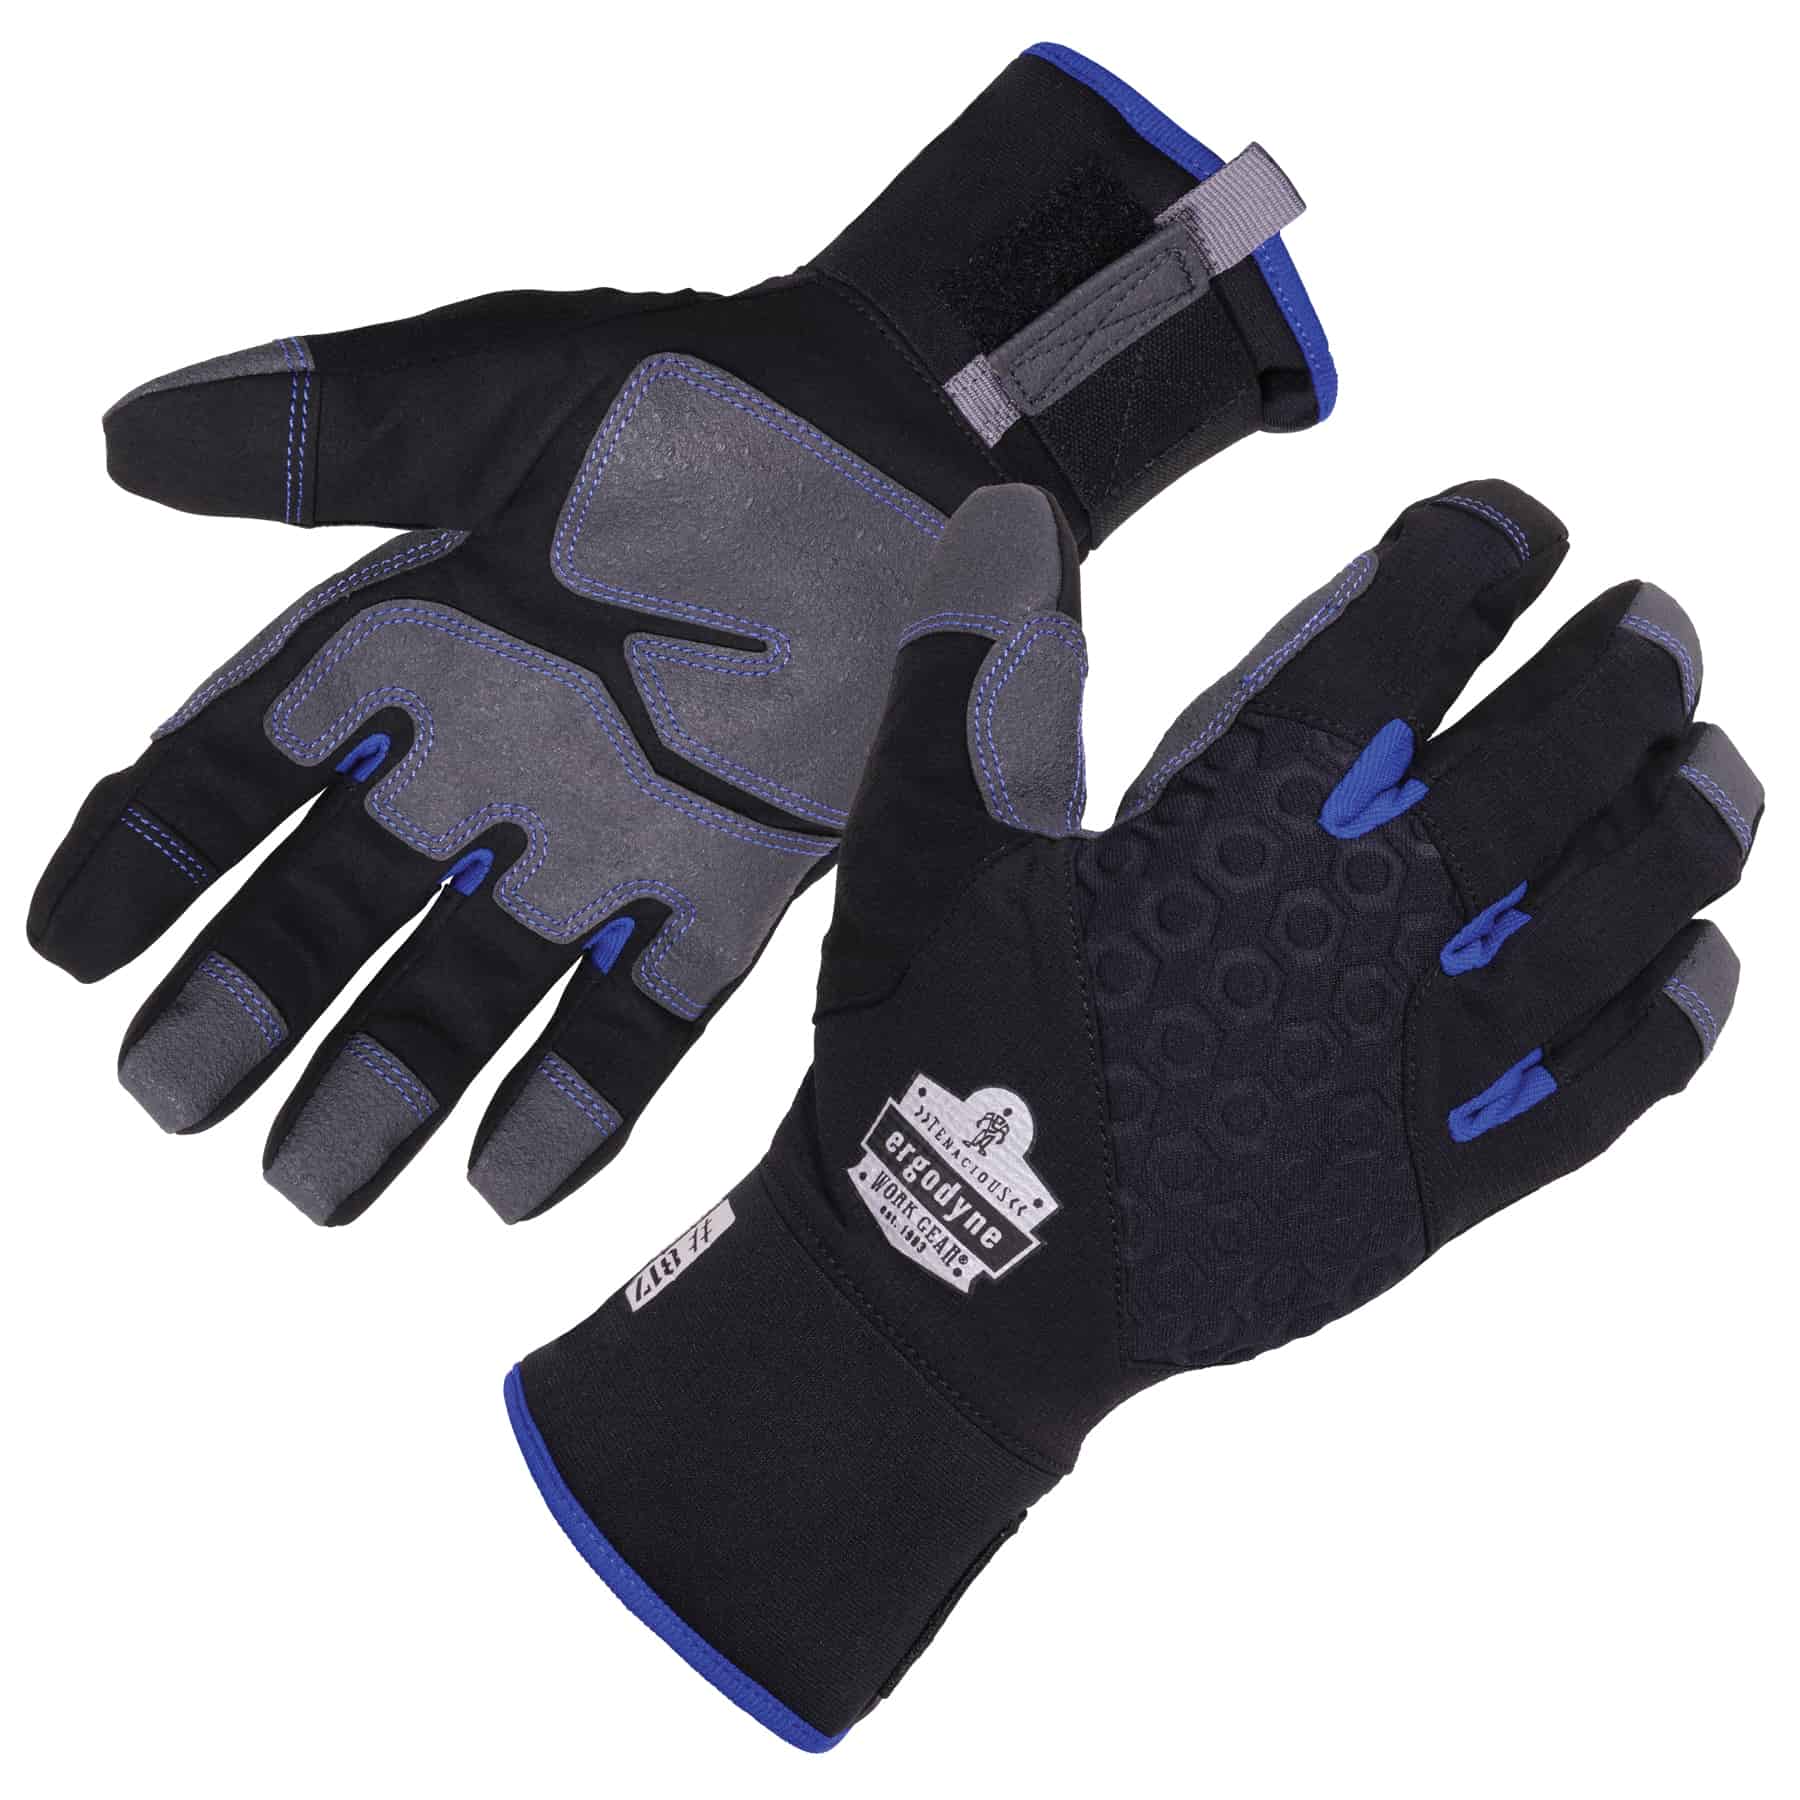 Reinforced Thermal Winter Work Gloves